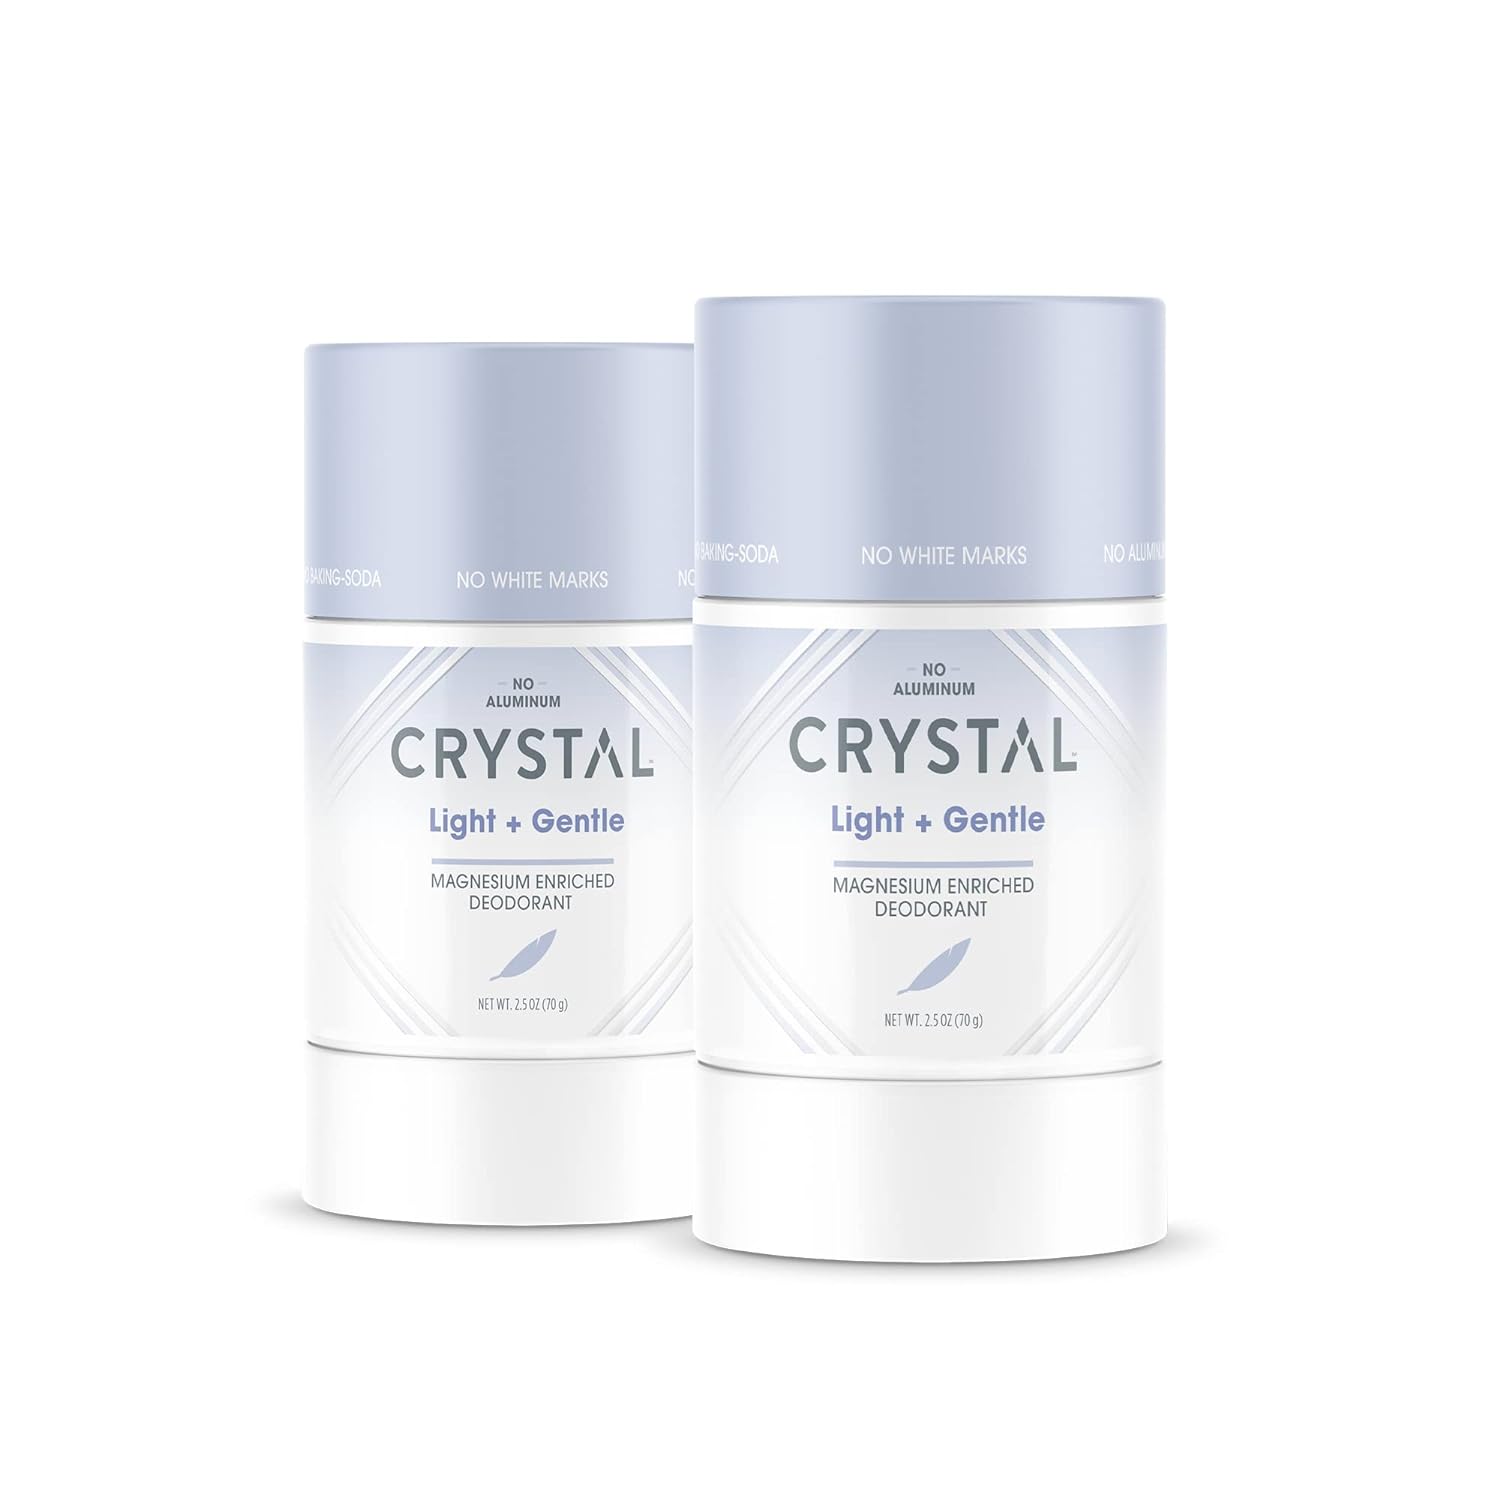 Crystal Magnesium Solid Stick Natural Deodorant, Non-Irritating Aluminum Free Deodorant for Men or Women, Safely and Effectively Fights Odor, Baking Soda Free, Light + Gentle (2.5 oz) 2 Pack